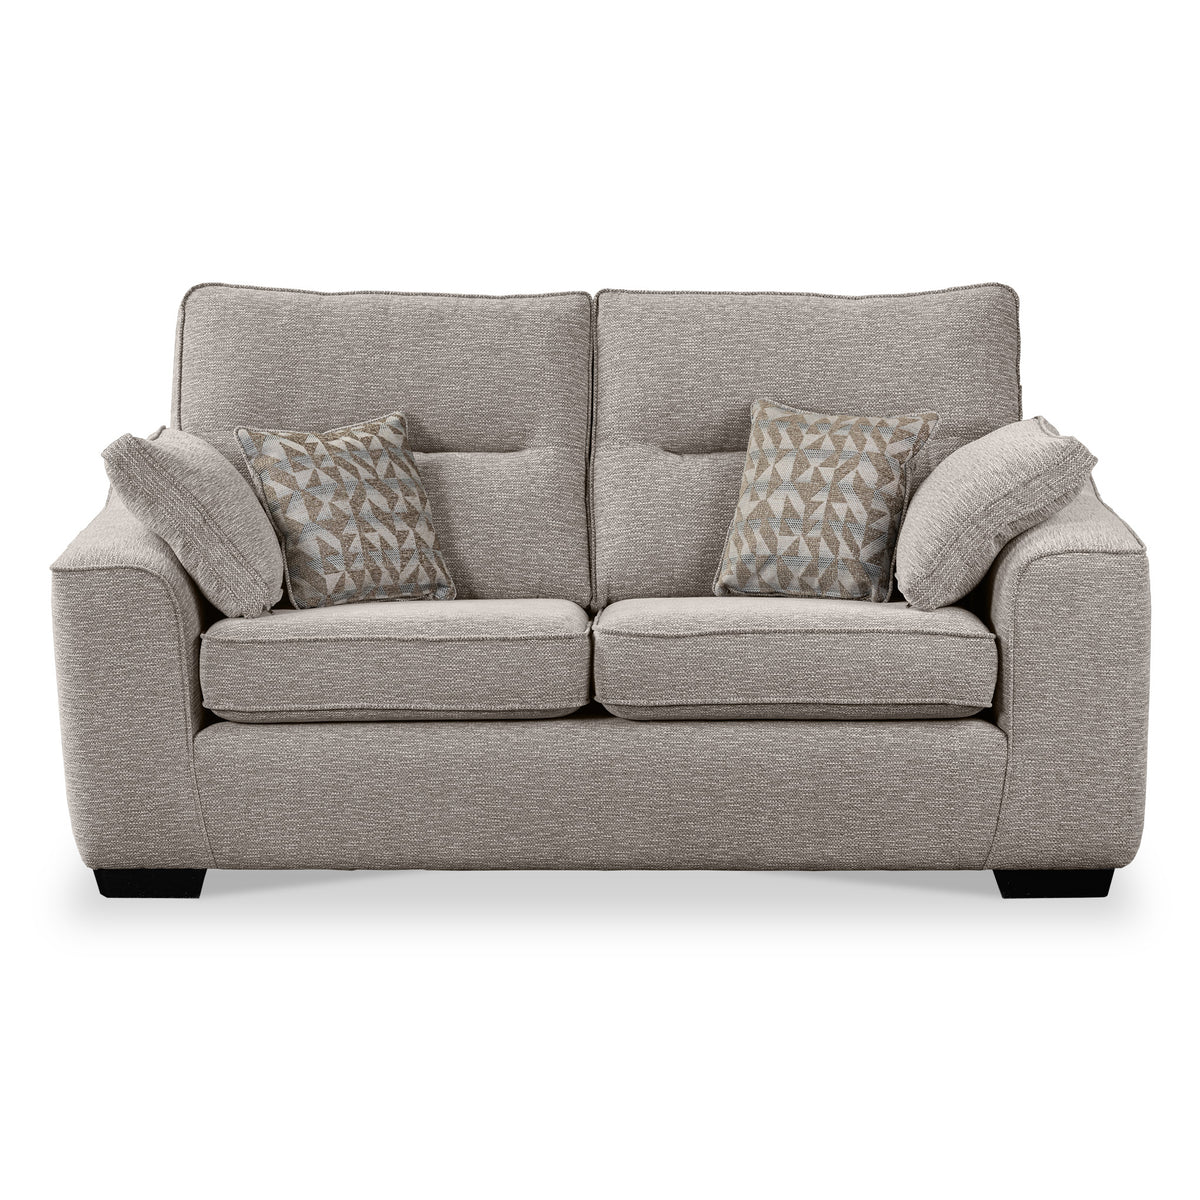 Sudbury Taupe 2 Seater Sofabed with Taupe Scatter Cushions